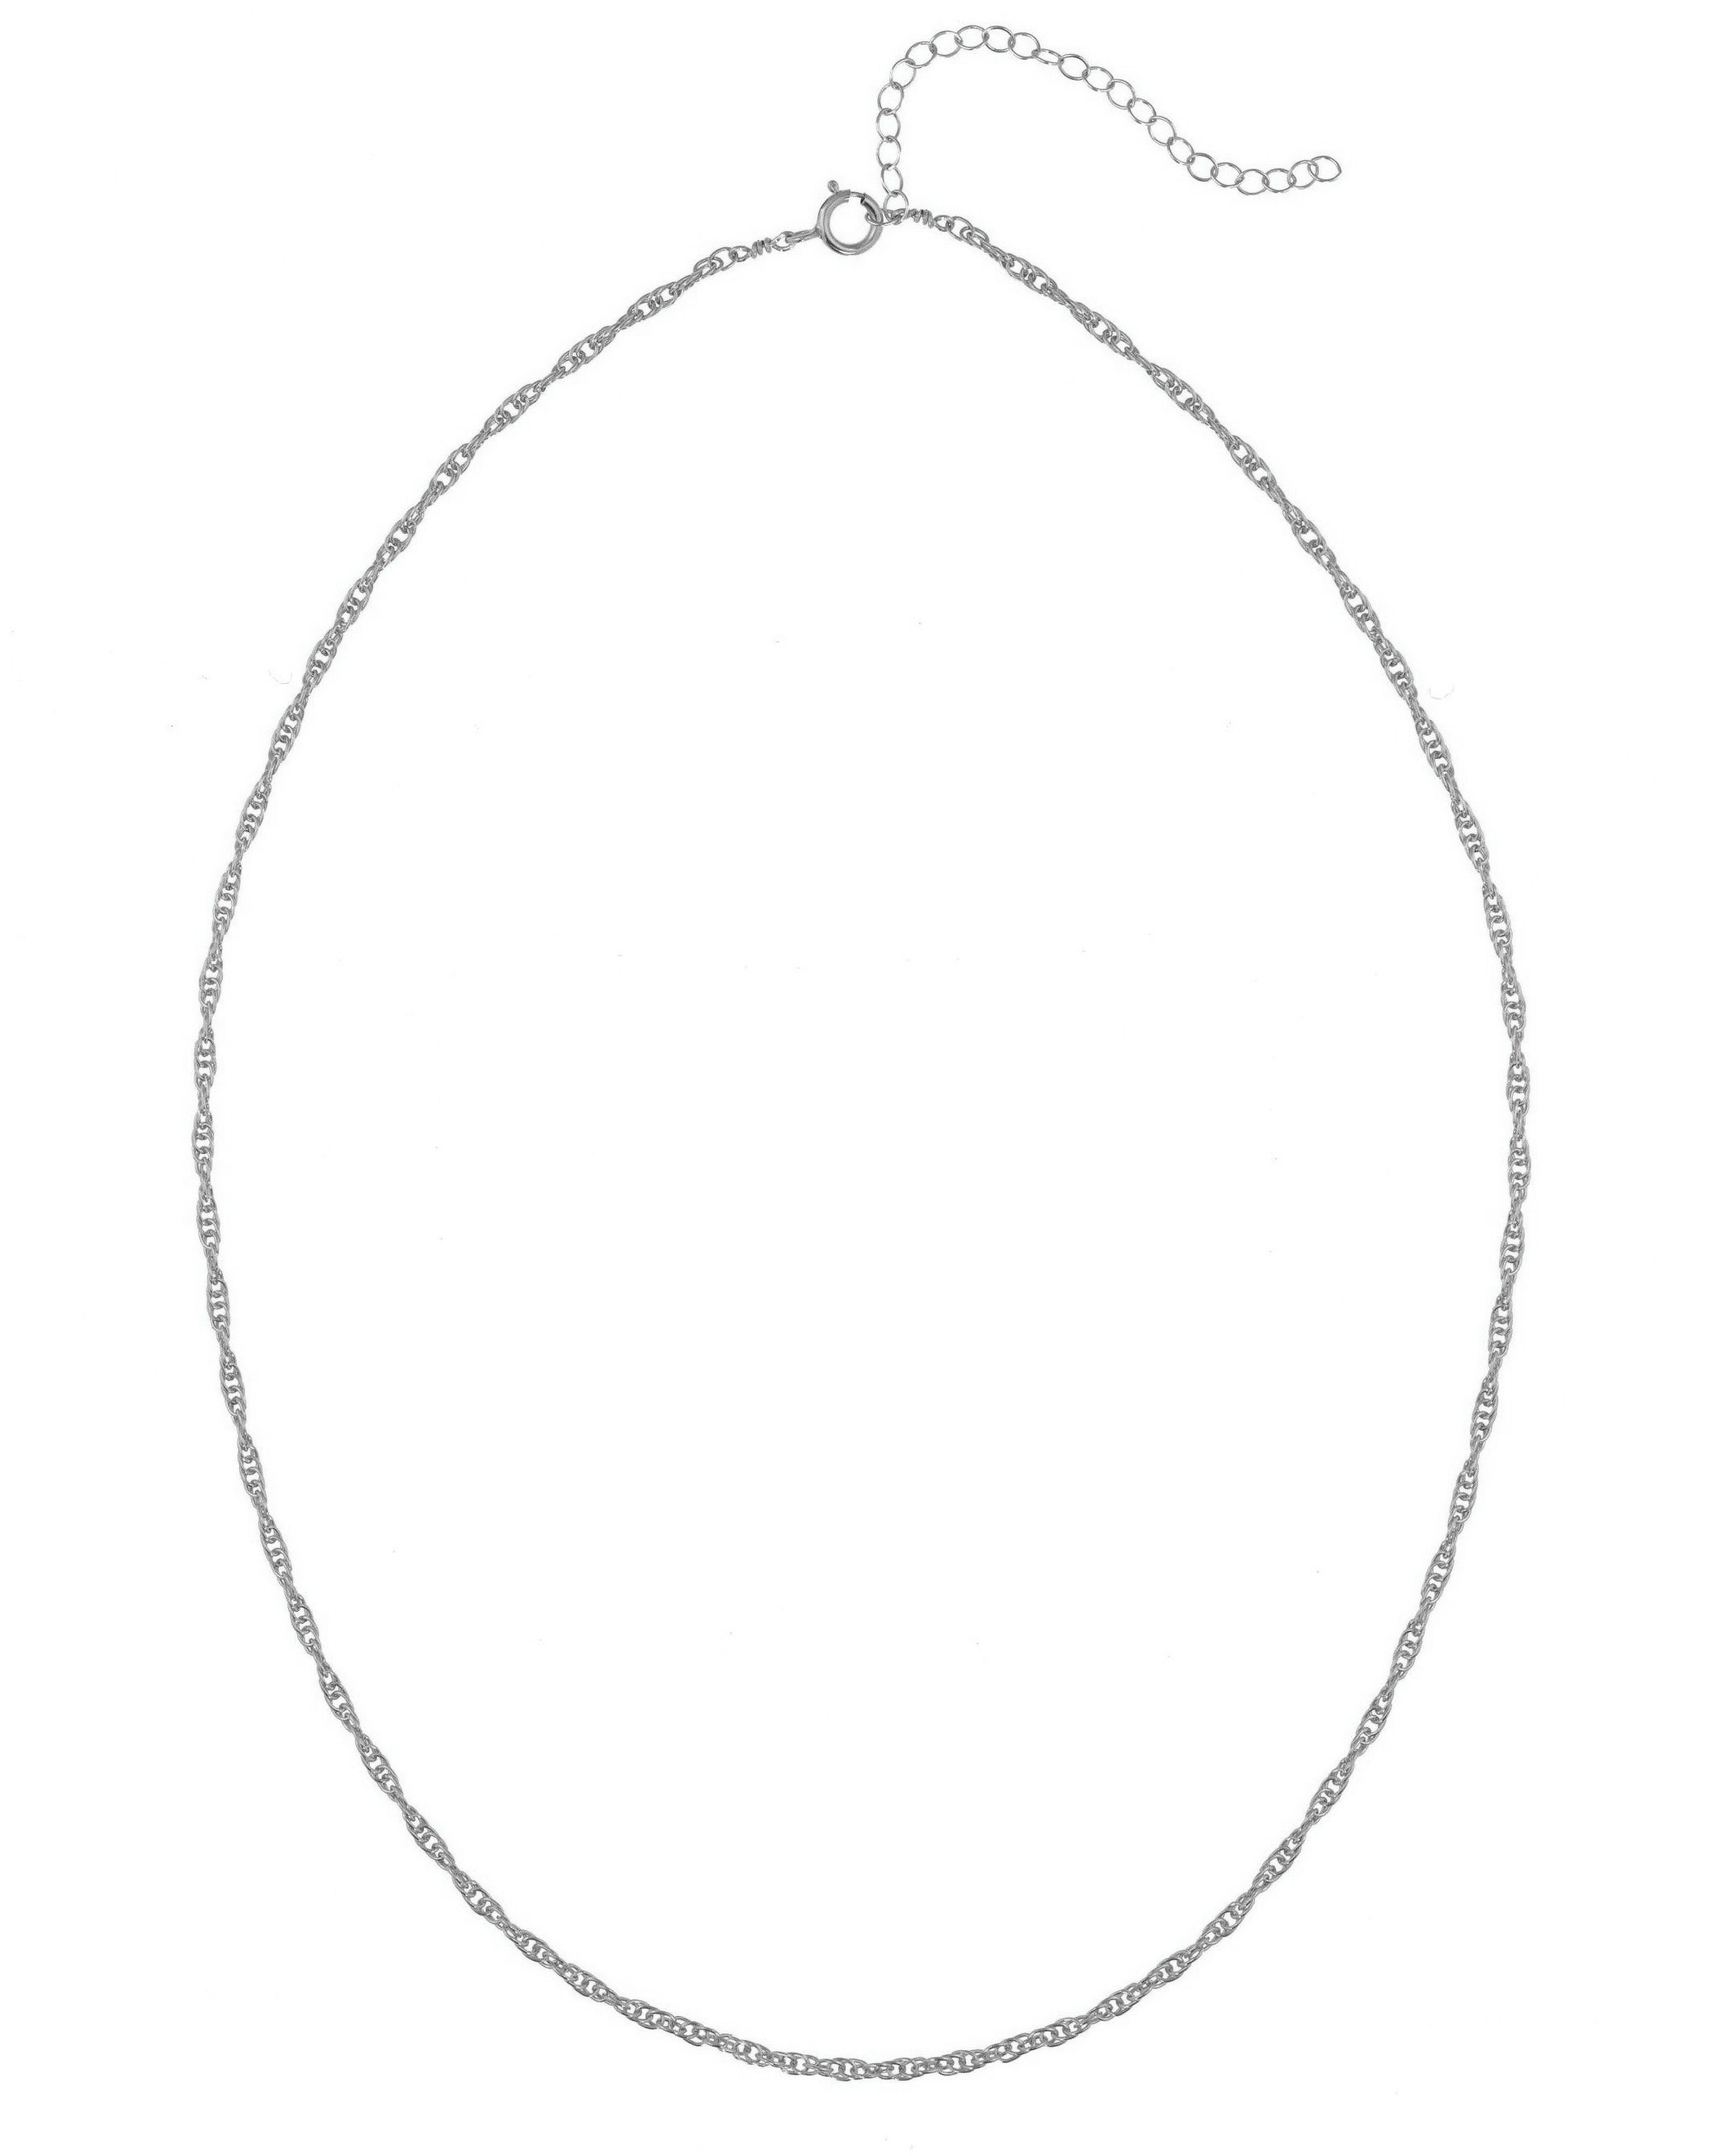 Kali Necklace by KOZAKH. A 14 inch long, 2mm thick twisted rope chain necklace, crafted in Sterling Silver.